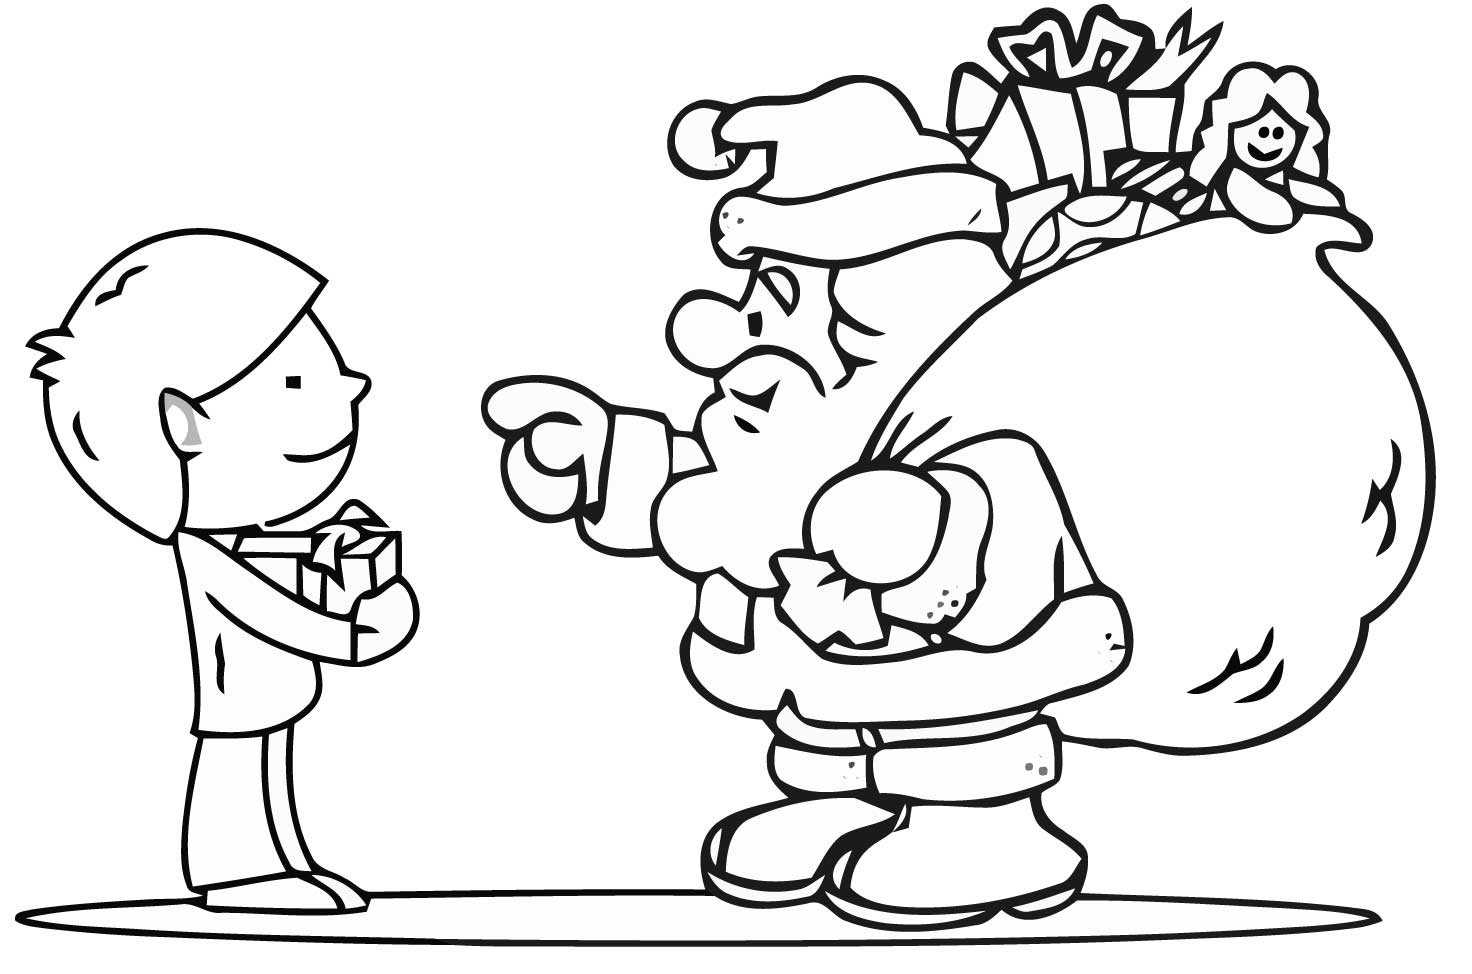 Kids Christmas Coloring Pages
 Free Christmas Colouring Pages For Children